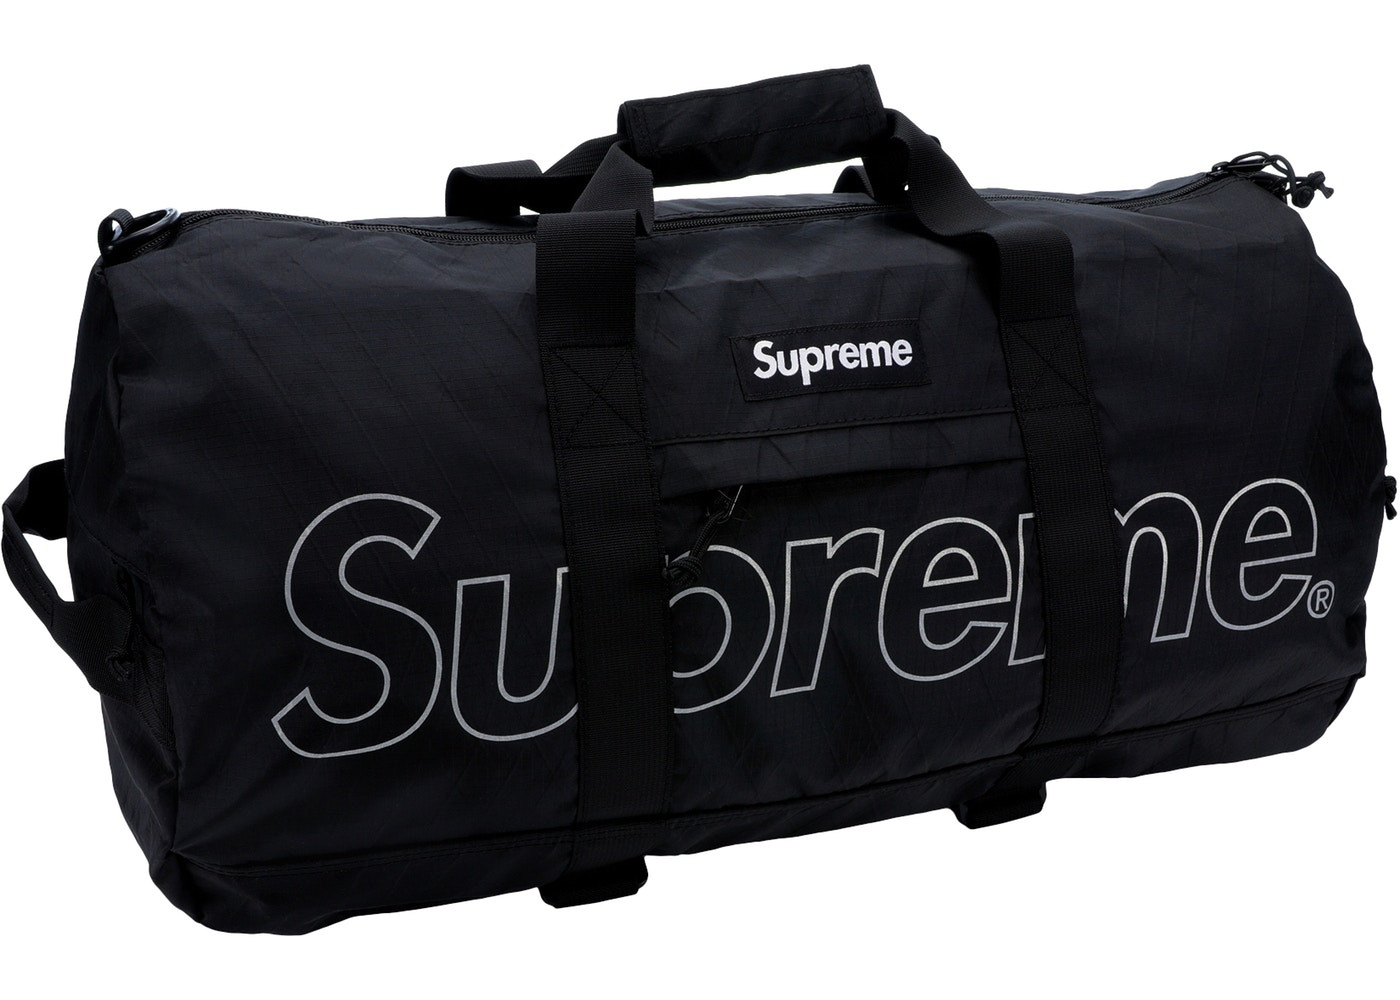 Supreme Duffle Bag FW18 brand new for Sale in Las Vegas, NV - OfferUp